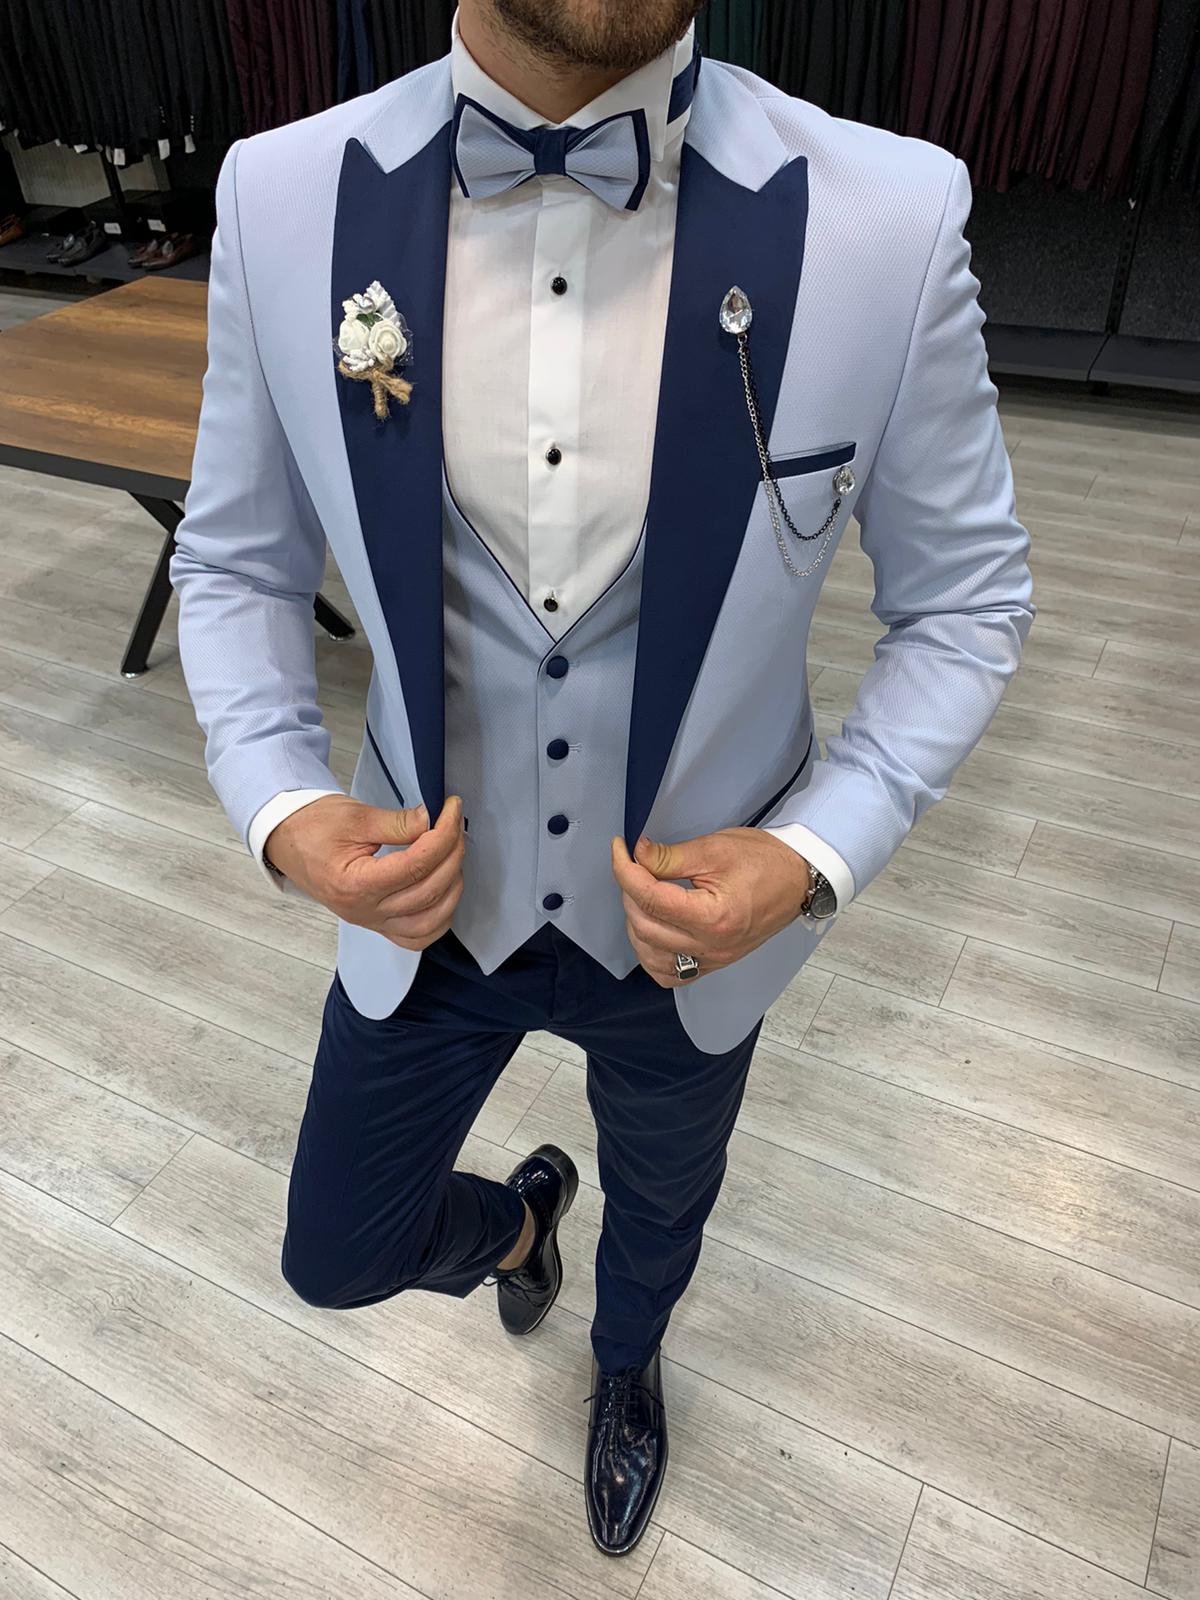 How to Wear a Blue Tuxedo – 5 Simple Rules by BespokeDailyShop Blog